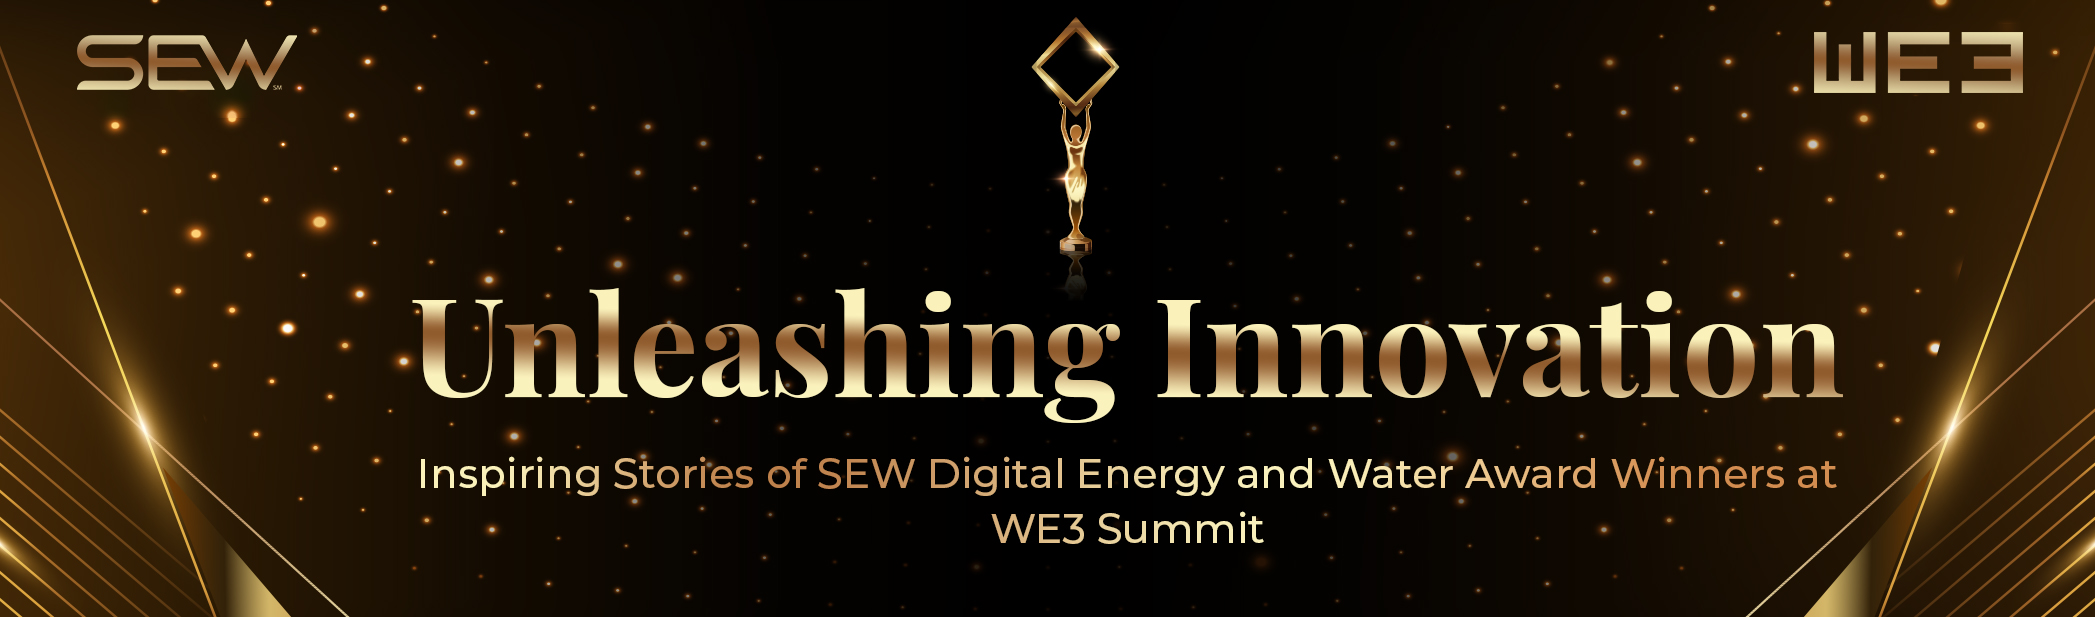 Unleashing Innovation: Inspiring Stories of SEW Digital Energy and Water Award Winners at WE3 Summit